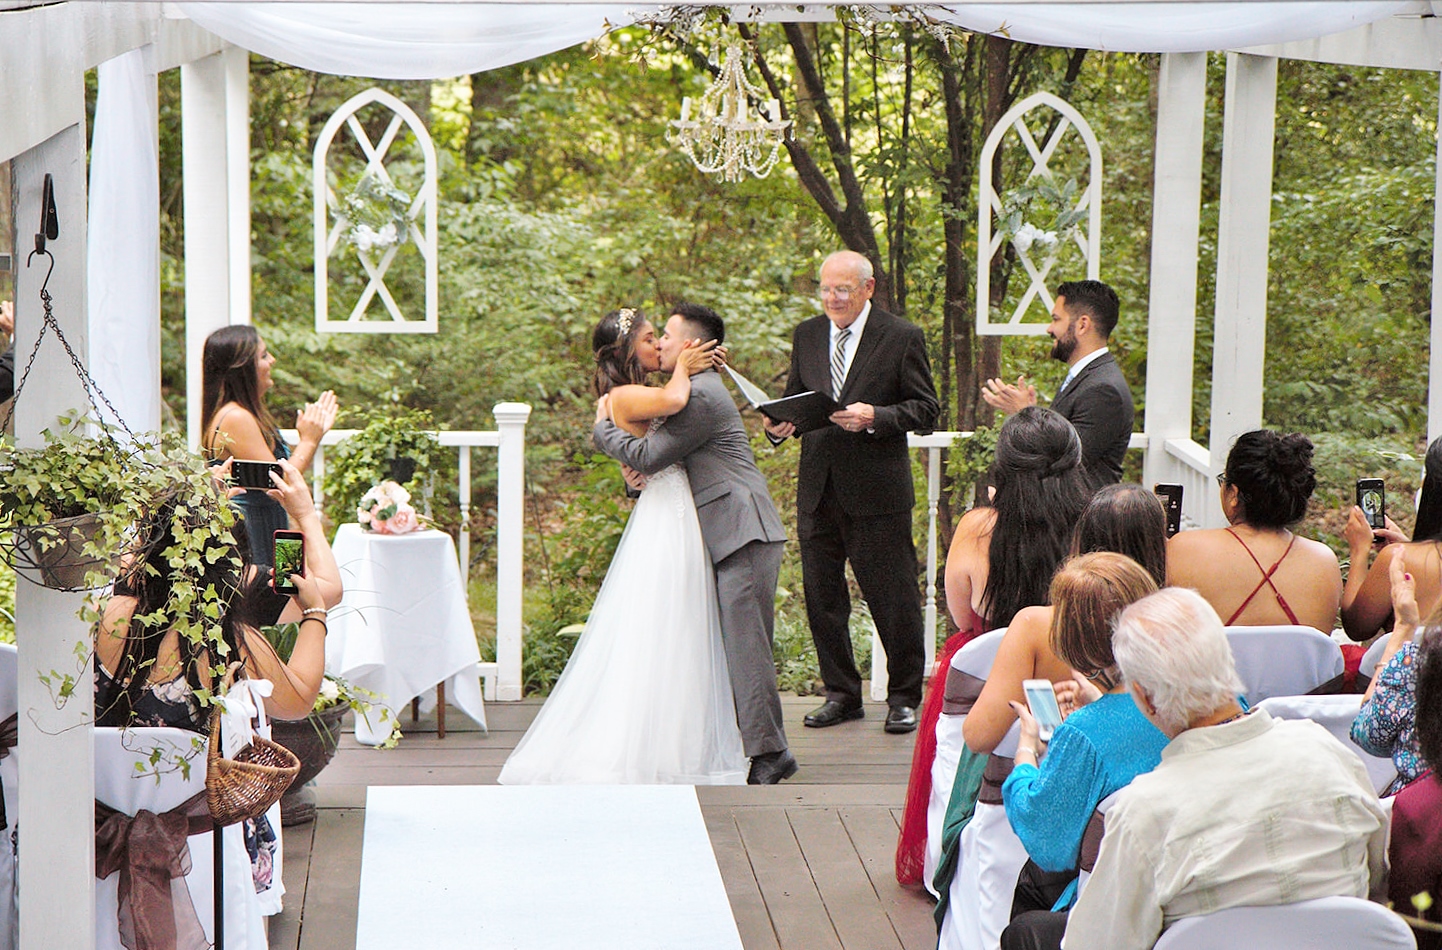 Bride and groom kiss first ceremony.